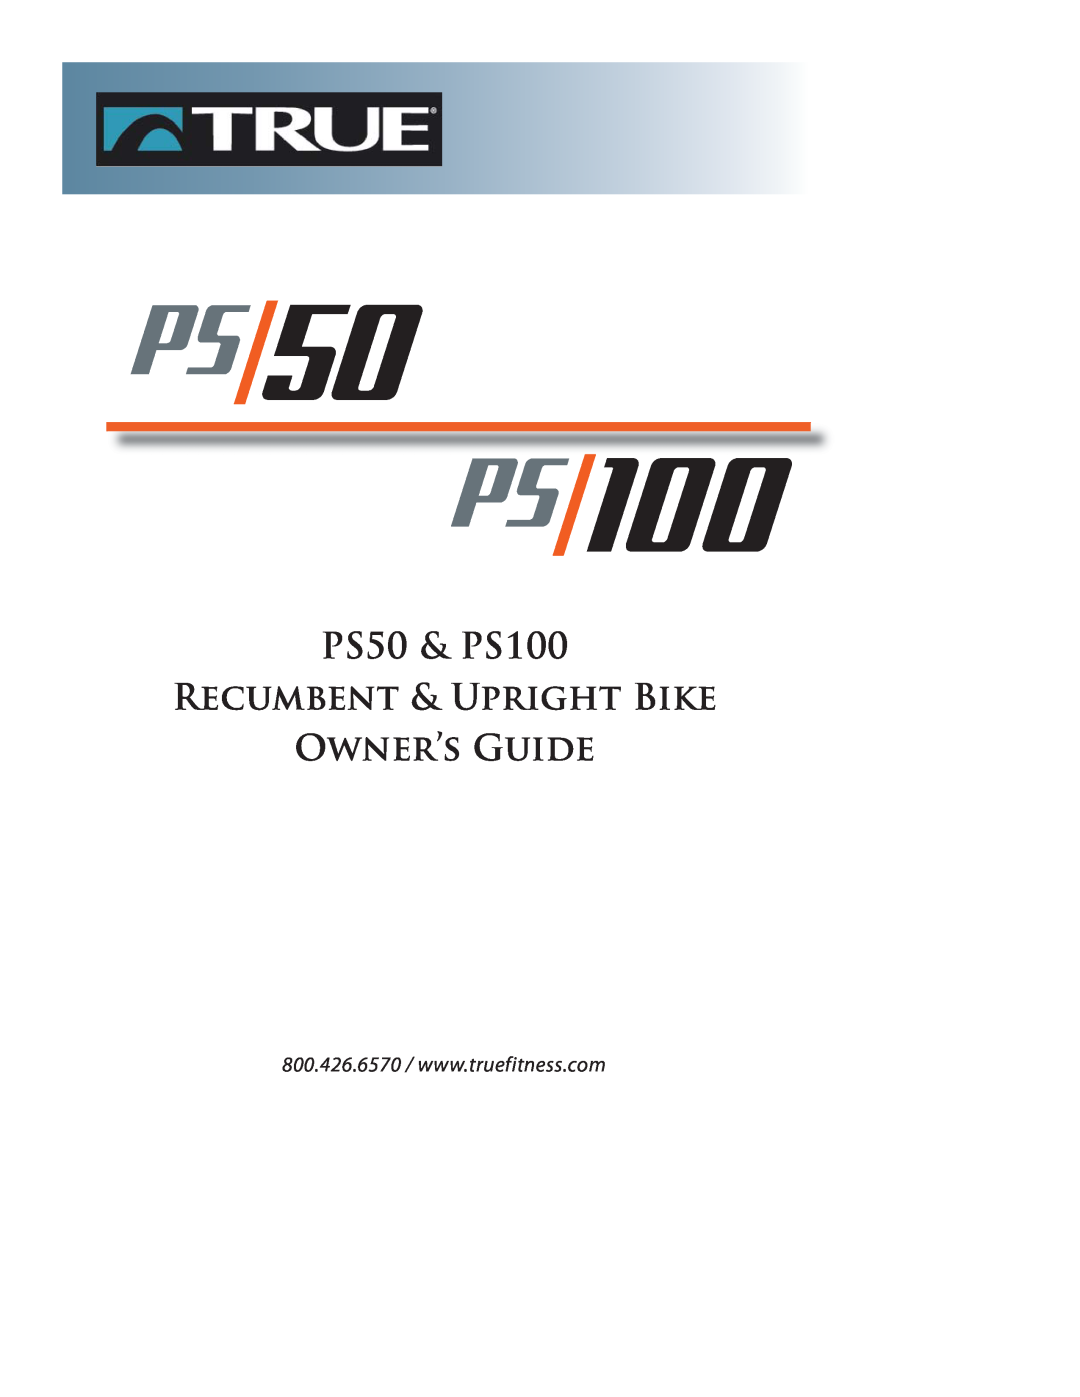 True Fitness P100 manual PS50 & PS100 Recumbent & Upright Bike Owner’s Guide 